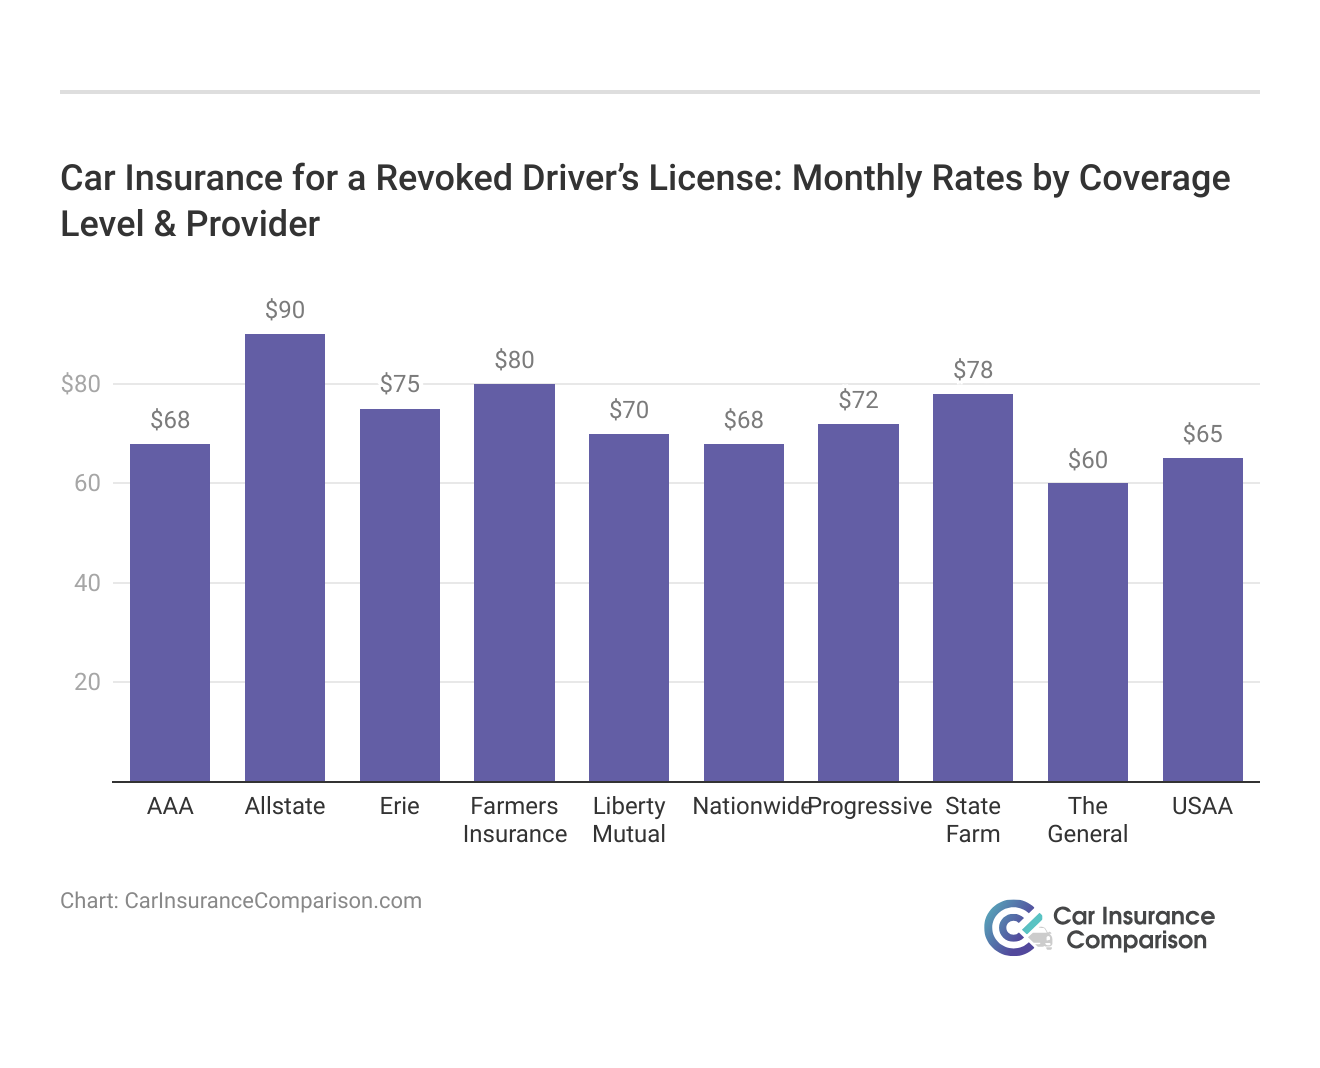 <h3>Car Insurance for a Revoked Driver’s License: Monthly Rates by Coverage Level & Provider</h3>